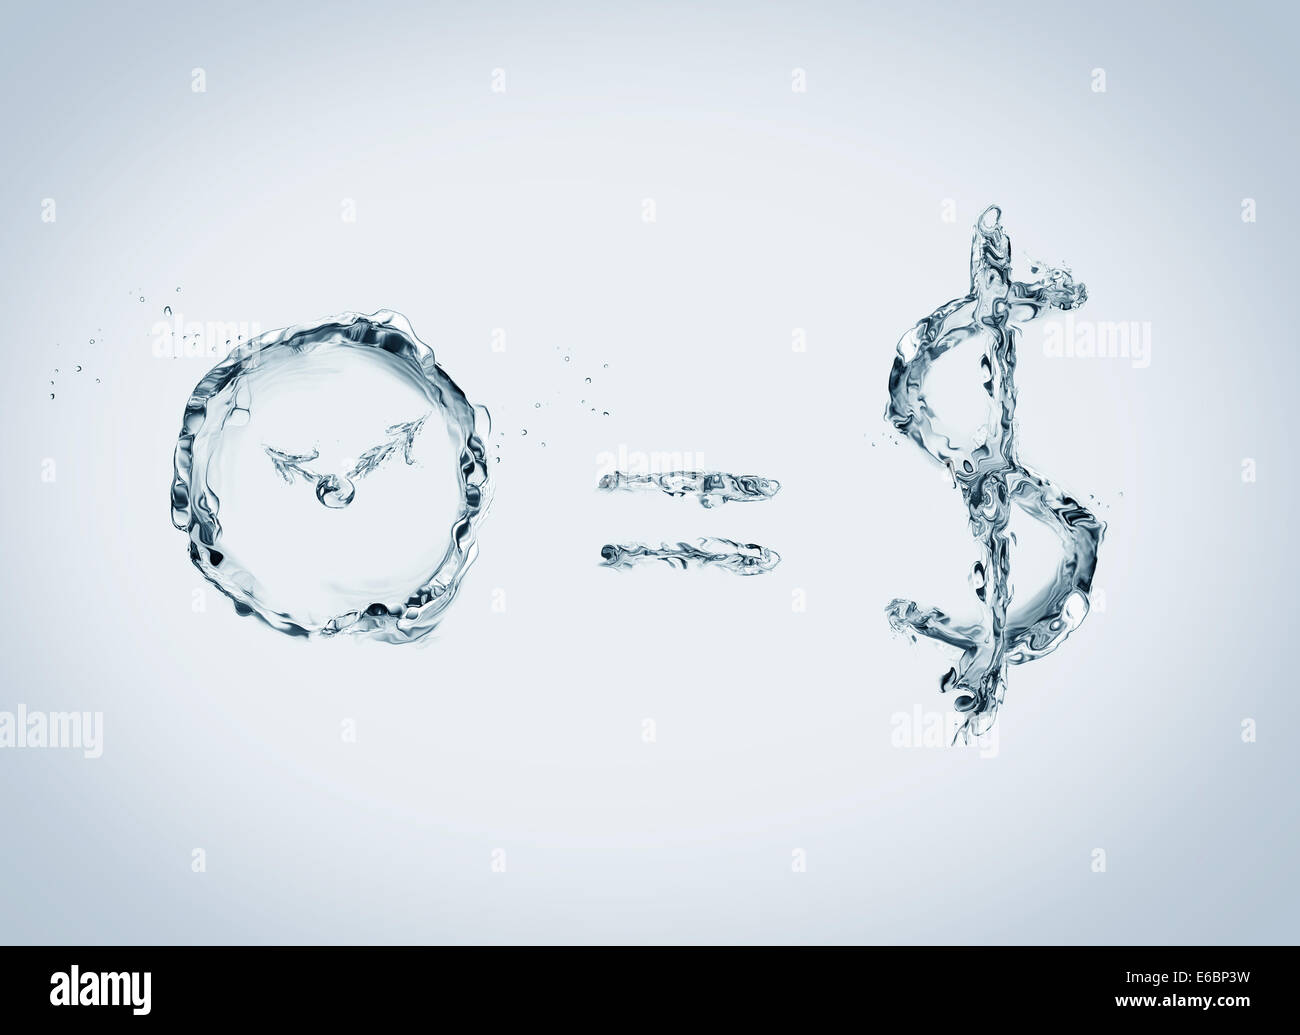 A business concept representing the saying that time is money. All elements made of water. Stock Photo